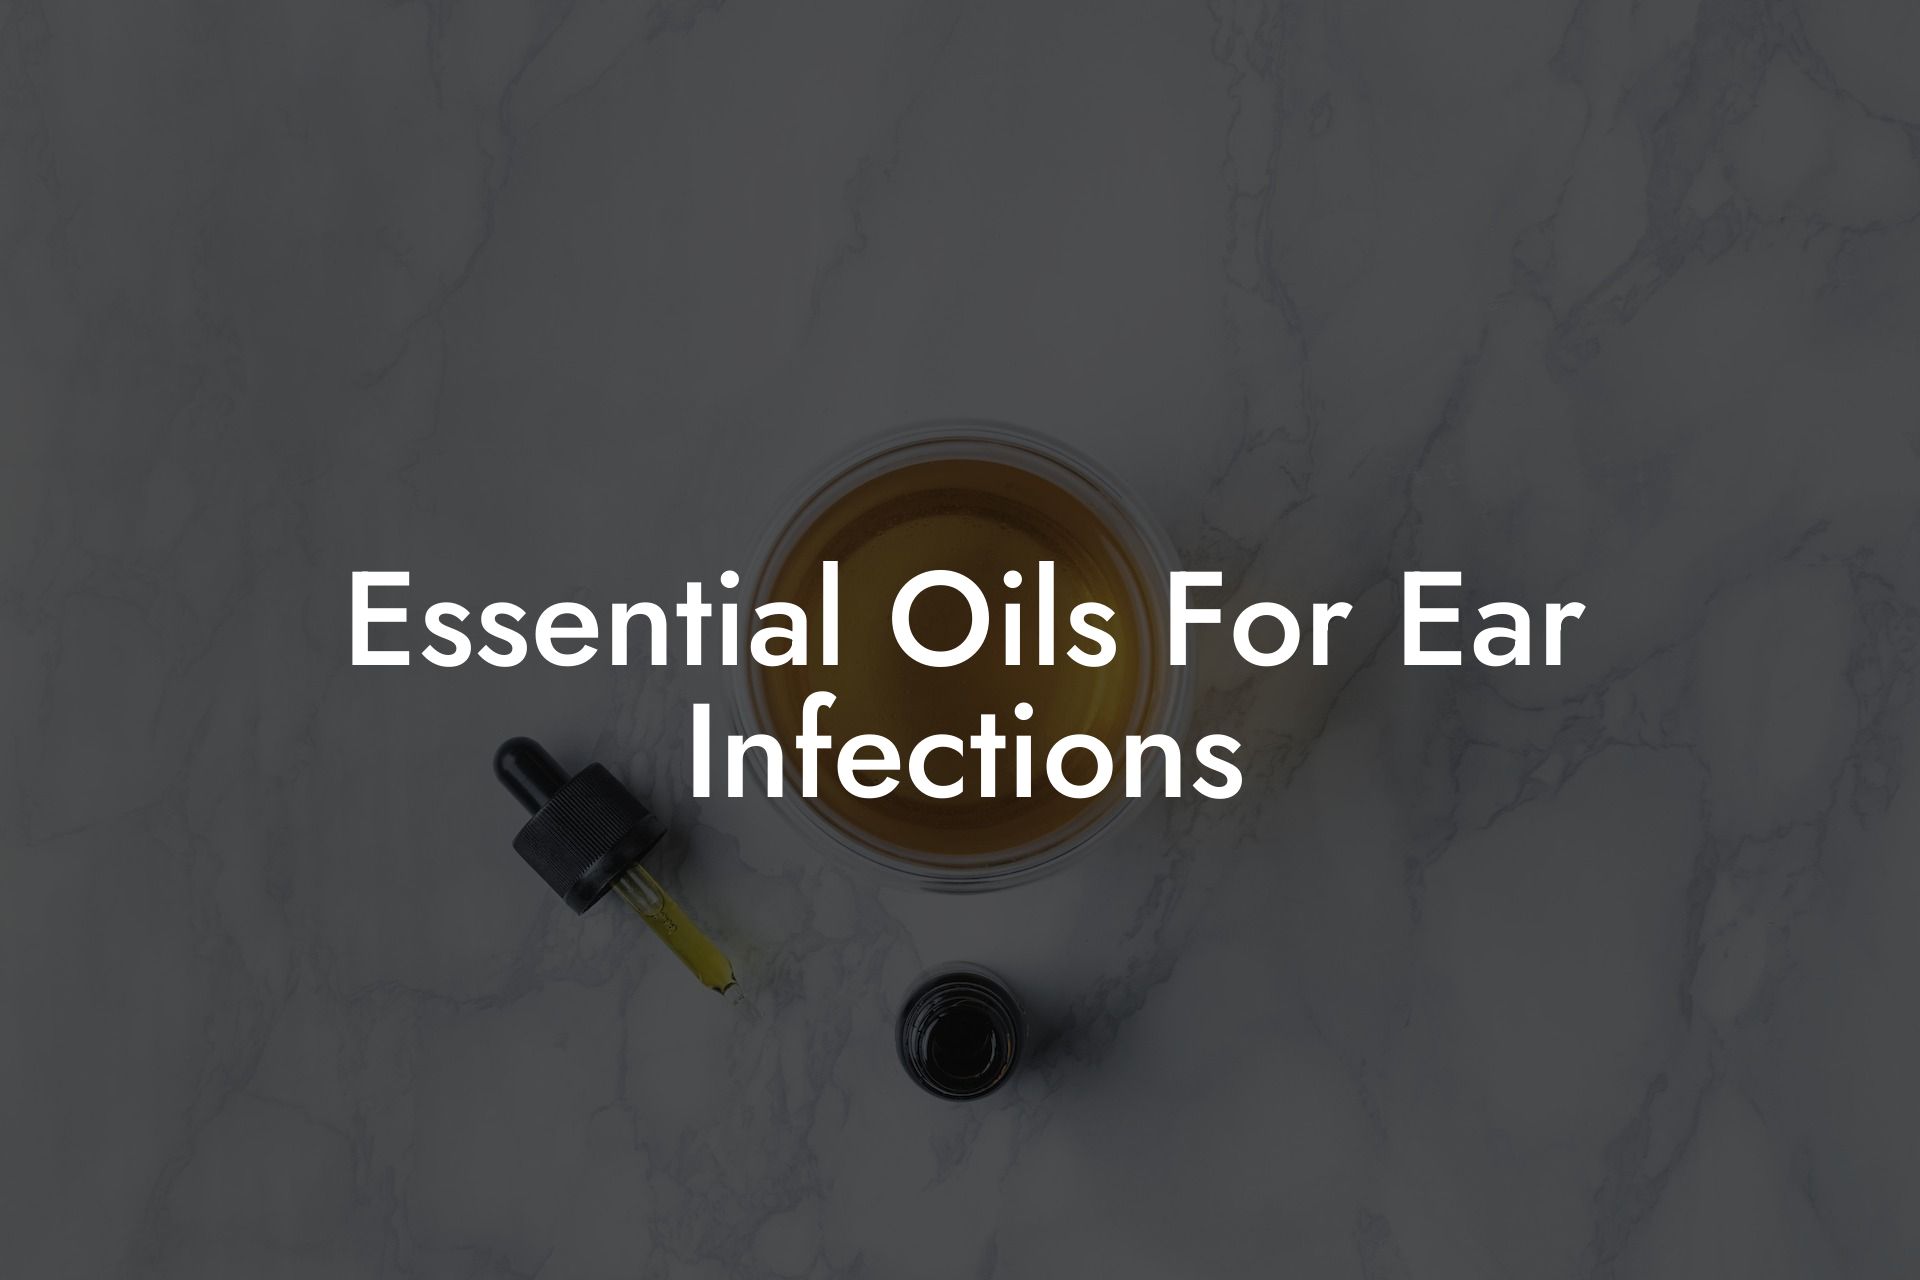 Essential Oils For Ear Infections